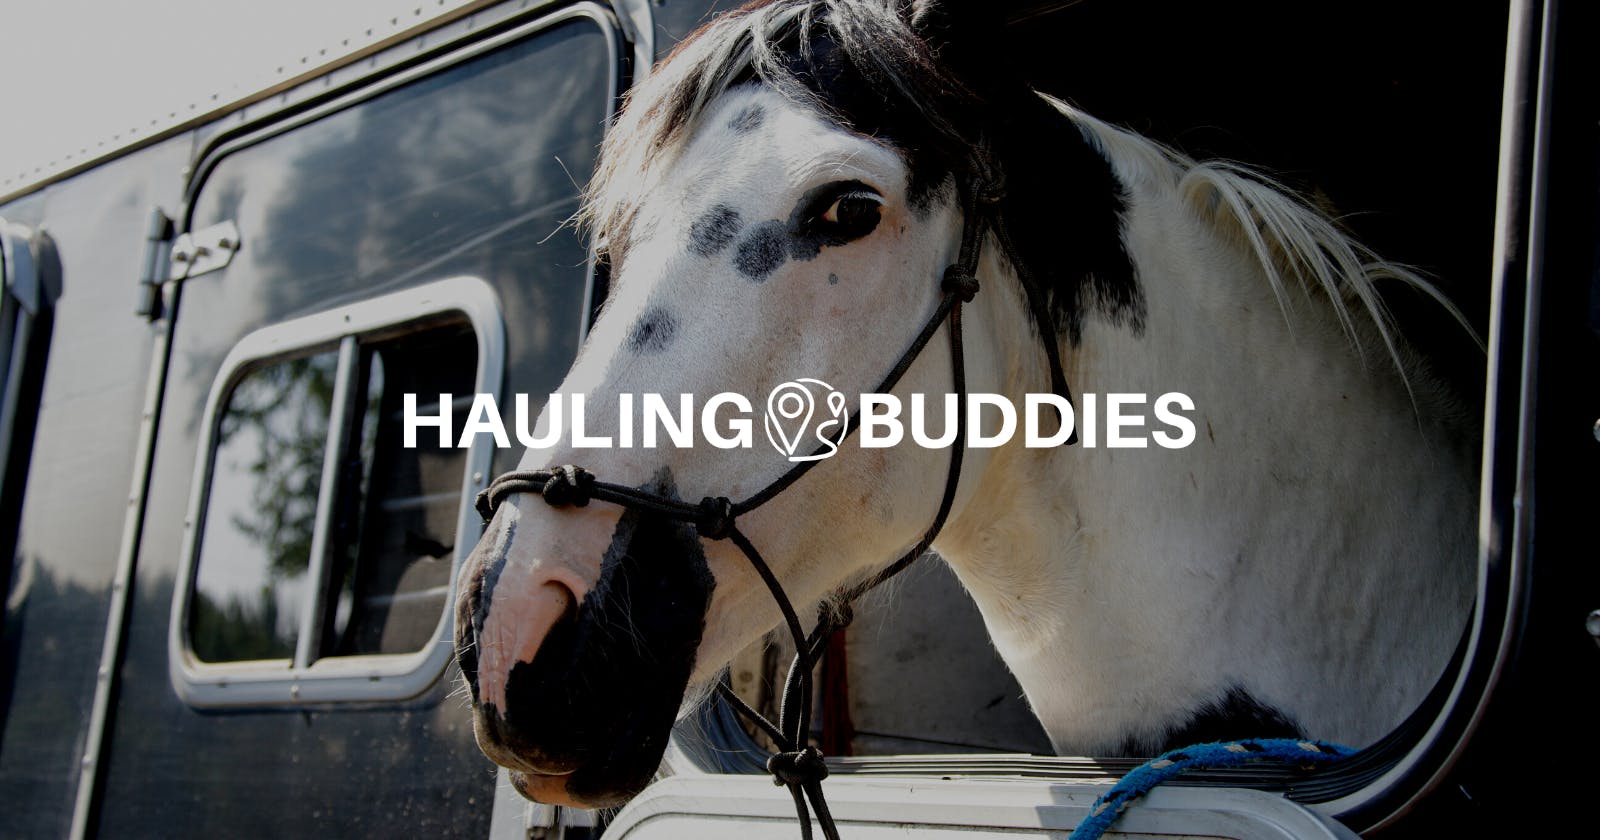 Horse Transport Regulations: Ensuring the Safety and Comfort of Your Equine Friend